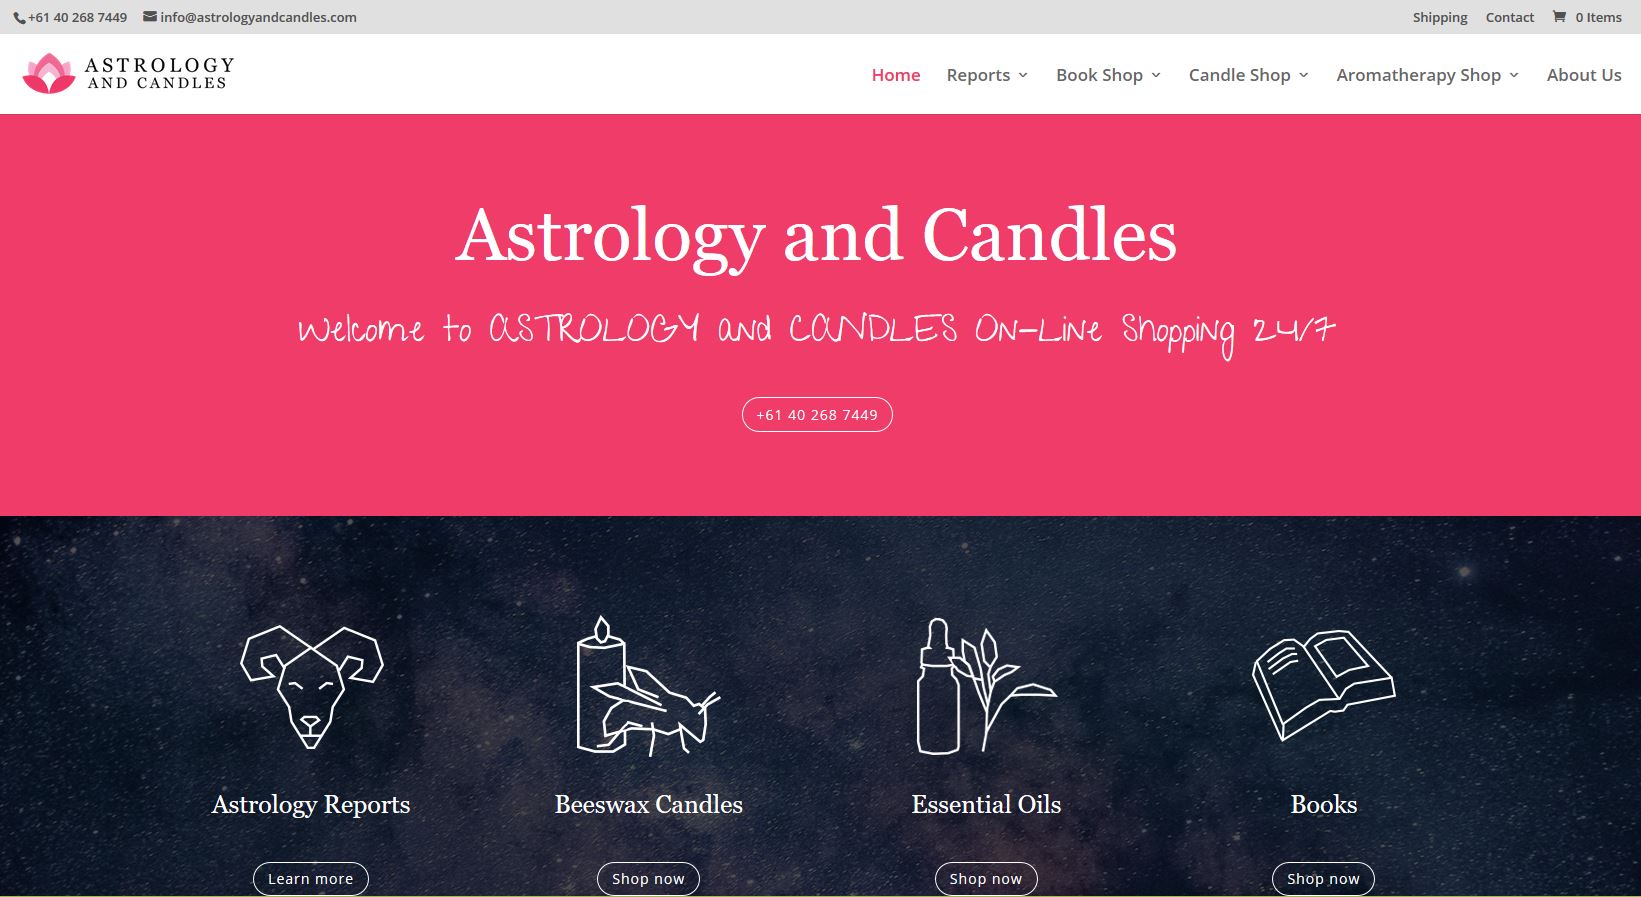 Ecommerce website with Astrology & Candles